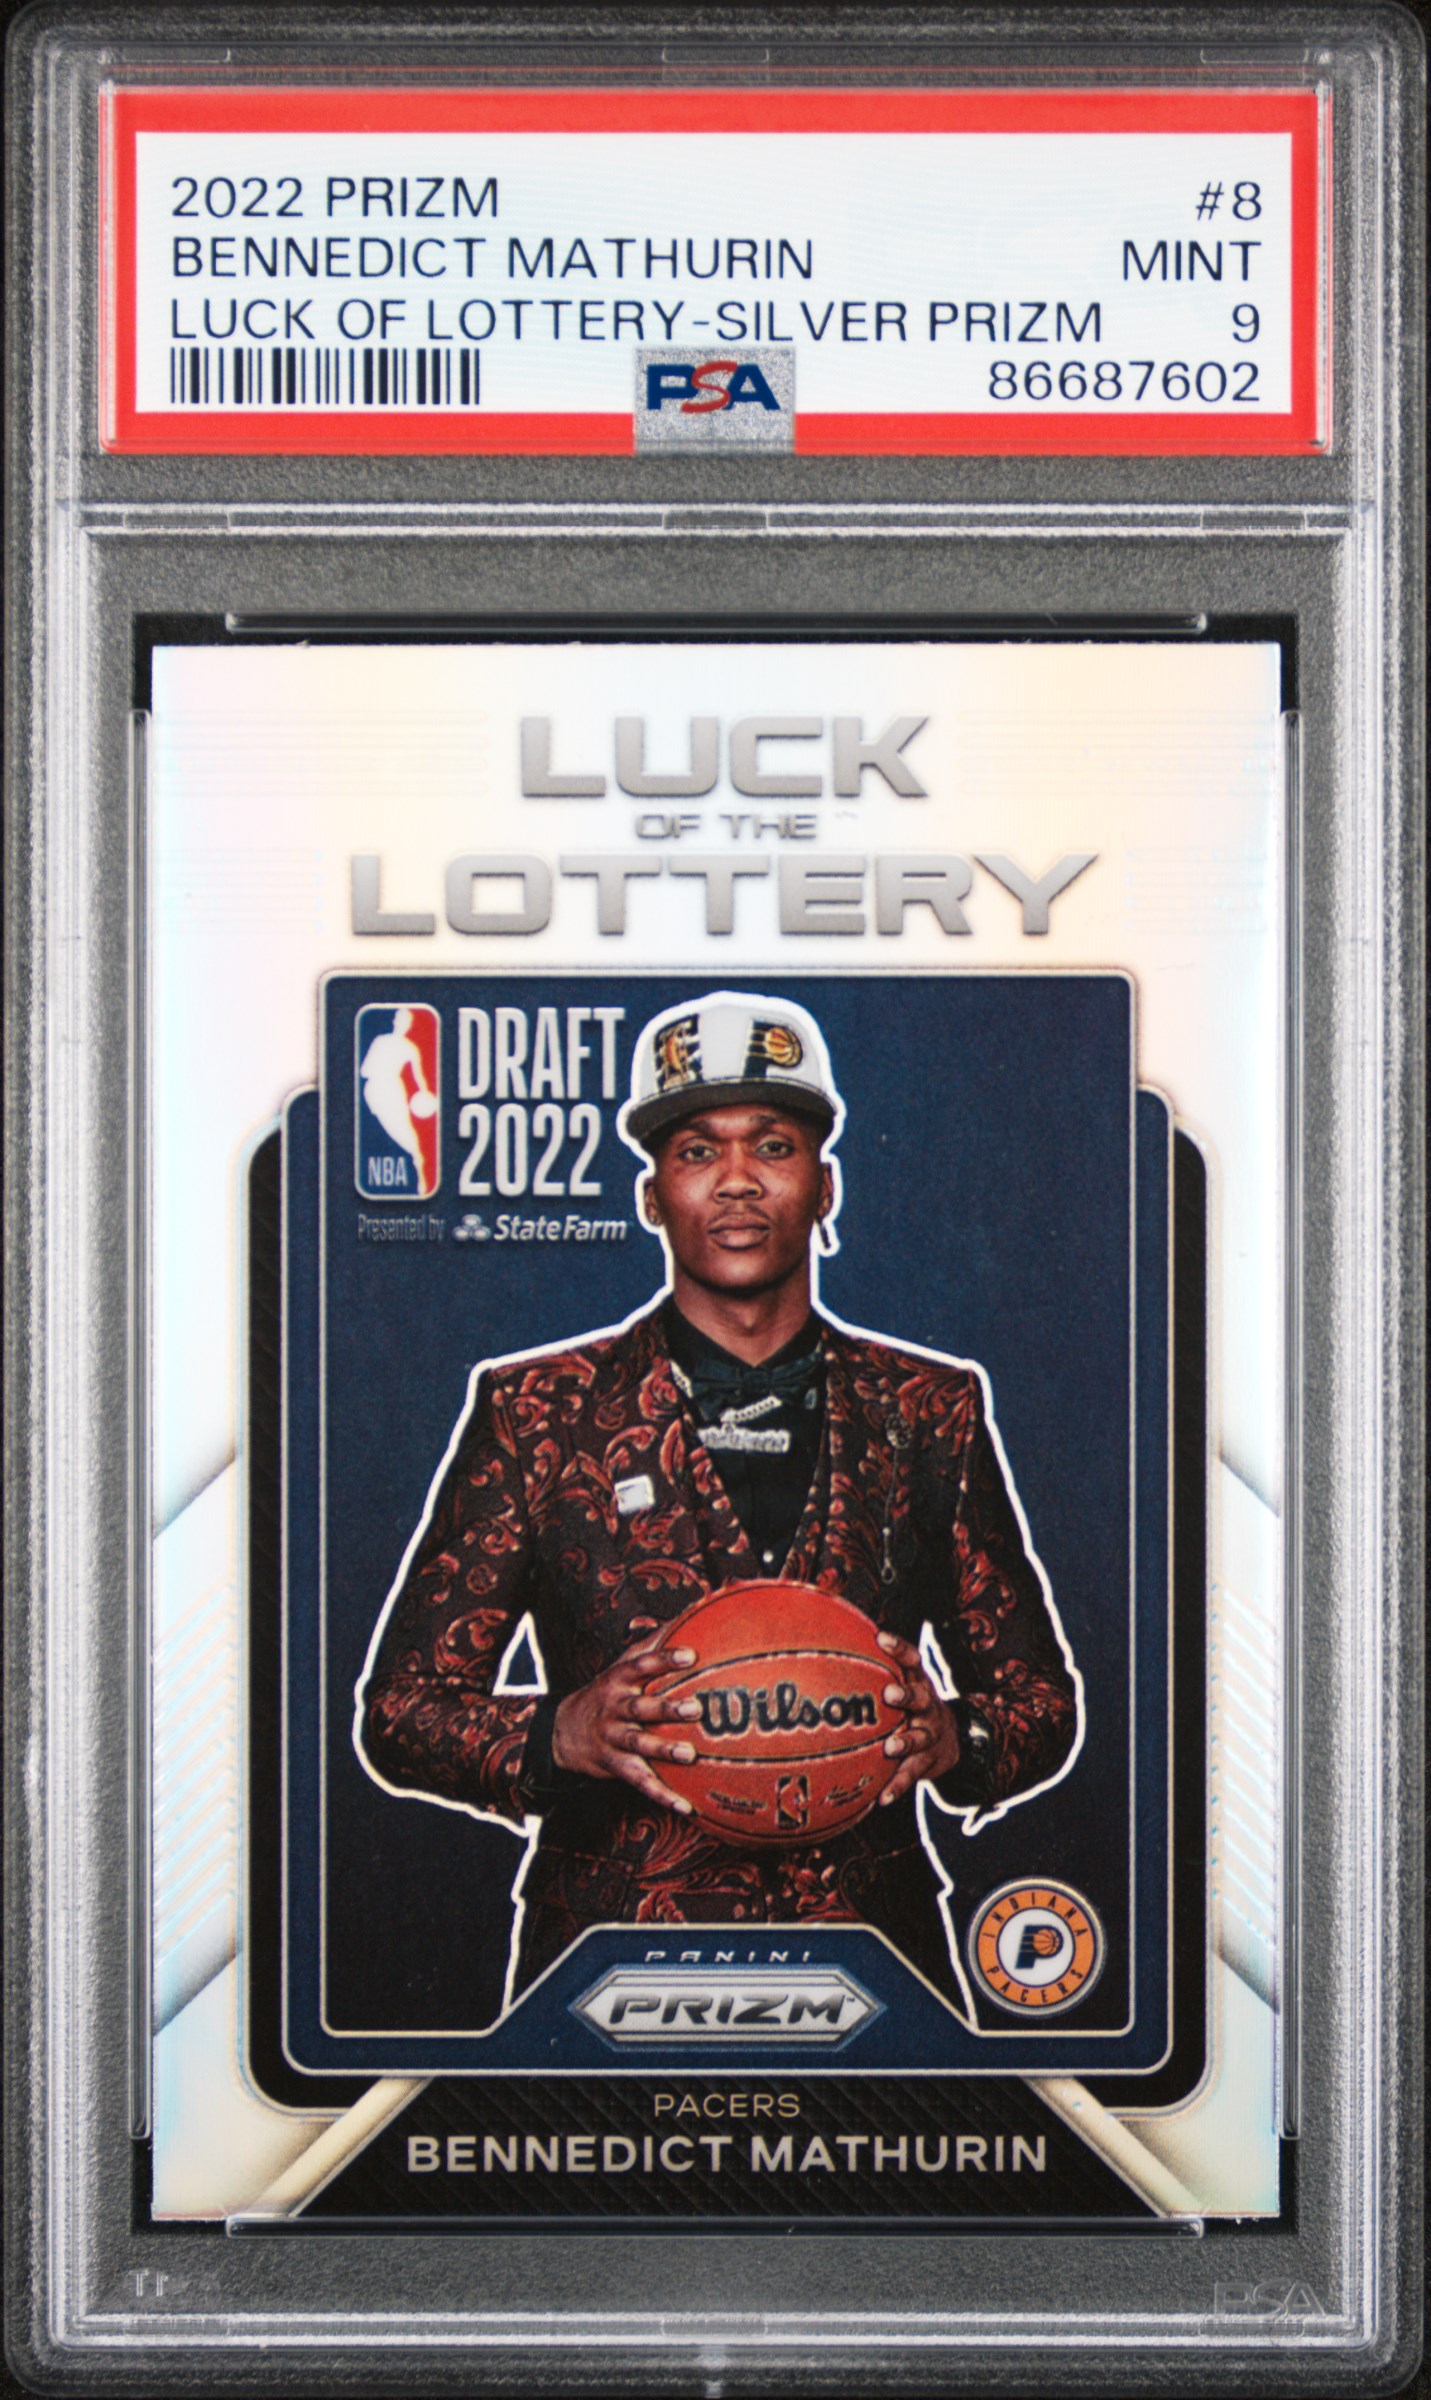 2022 Panini Prizm Luck Of The Lottery Silver Prizm #8 Bennedict Mathurin Rookie Card – PSA MINT 9